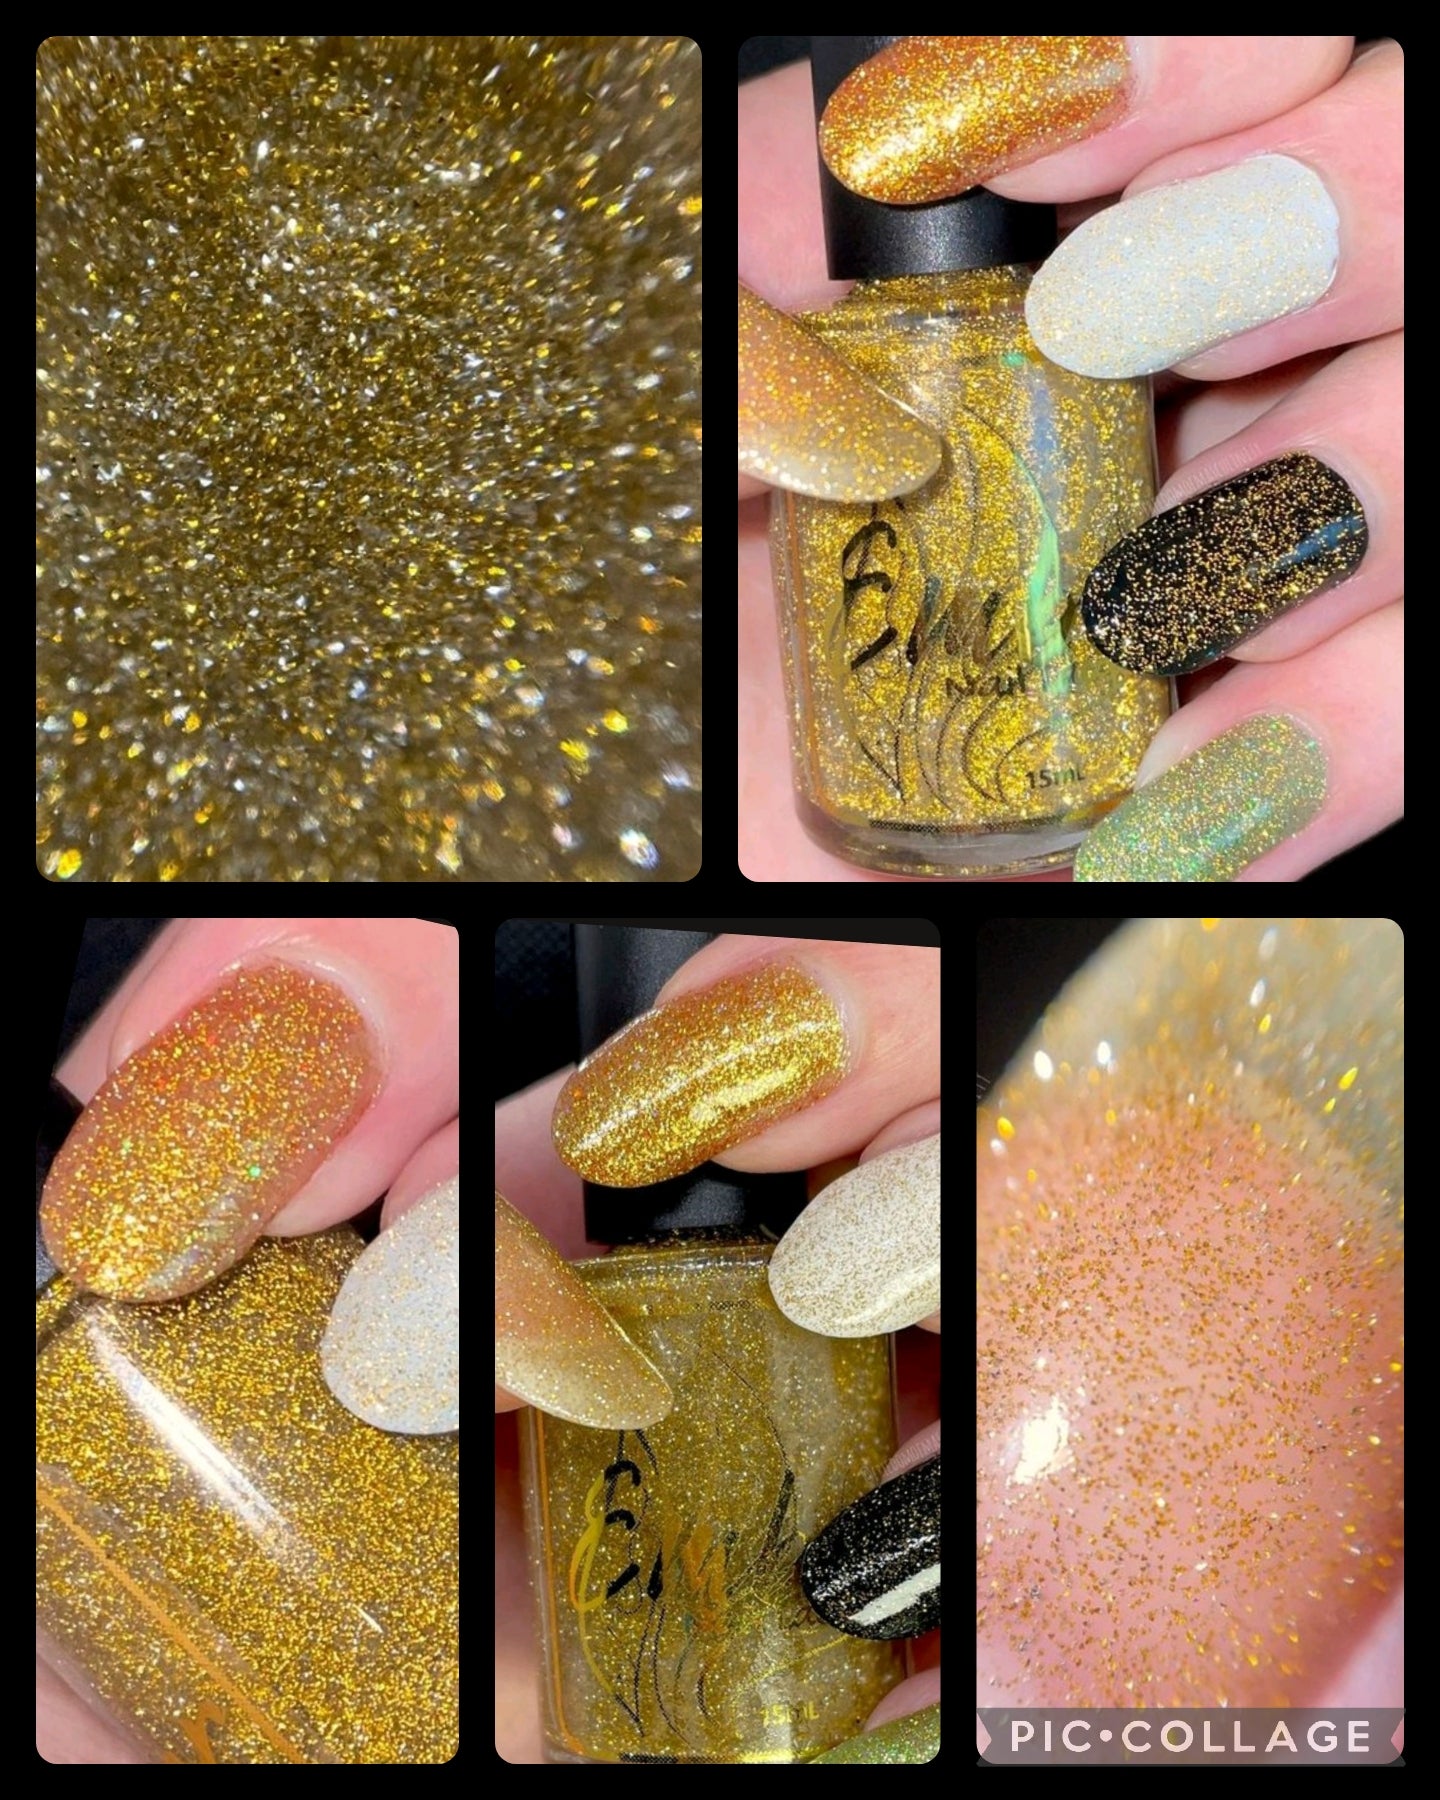 Sir  Puggleston Long Tongue in the bottle and over several different bases - lots of gold glitter